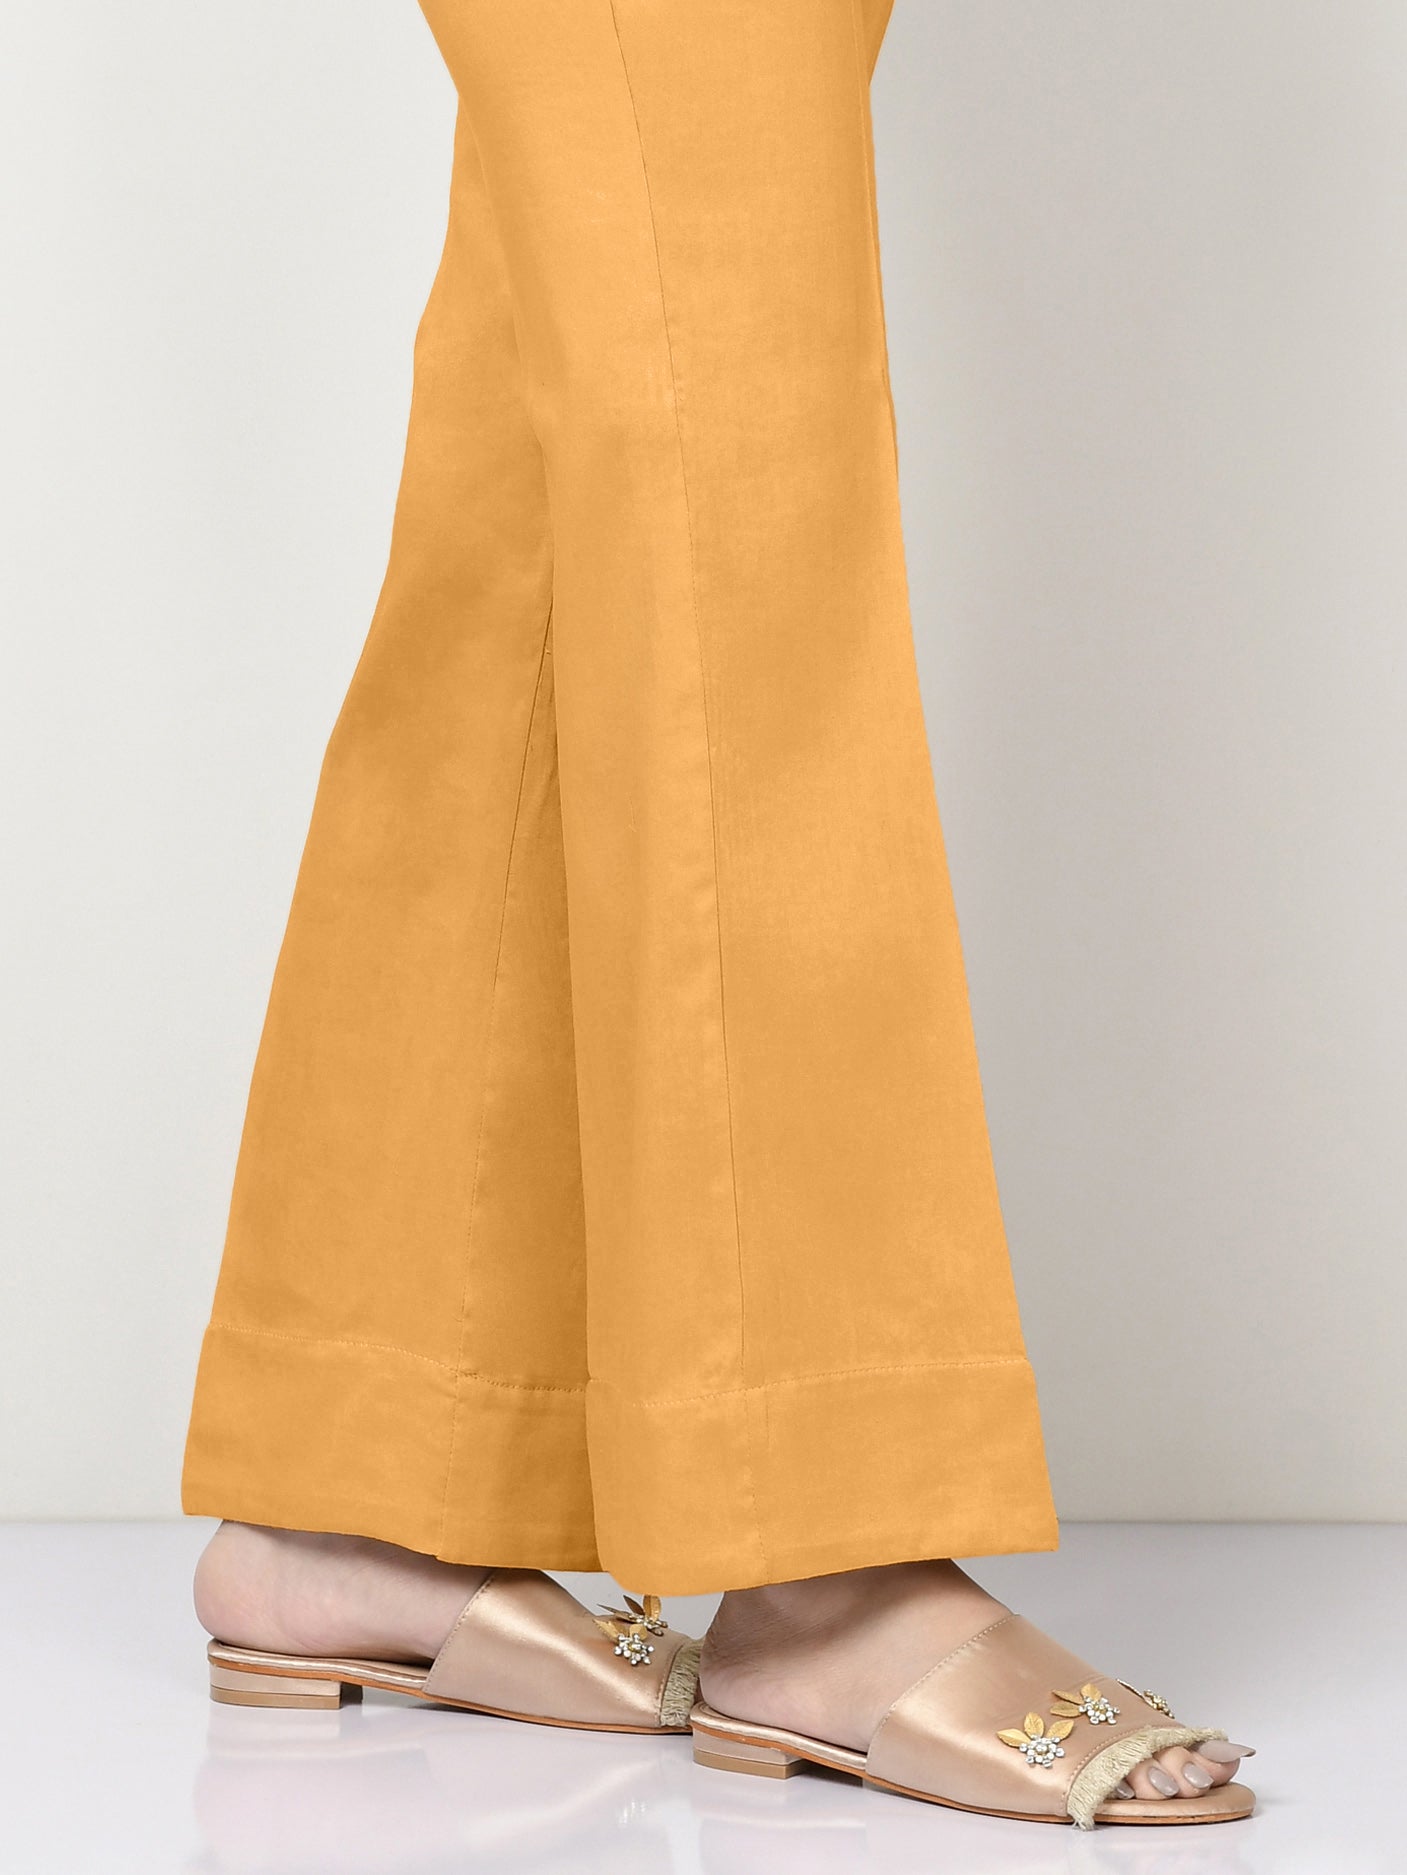 Unstitched Winter Cotton Trouser - Yellow